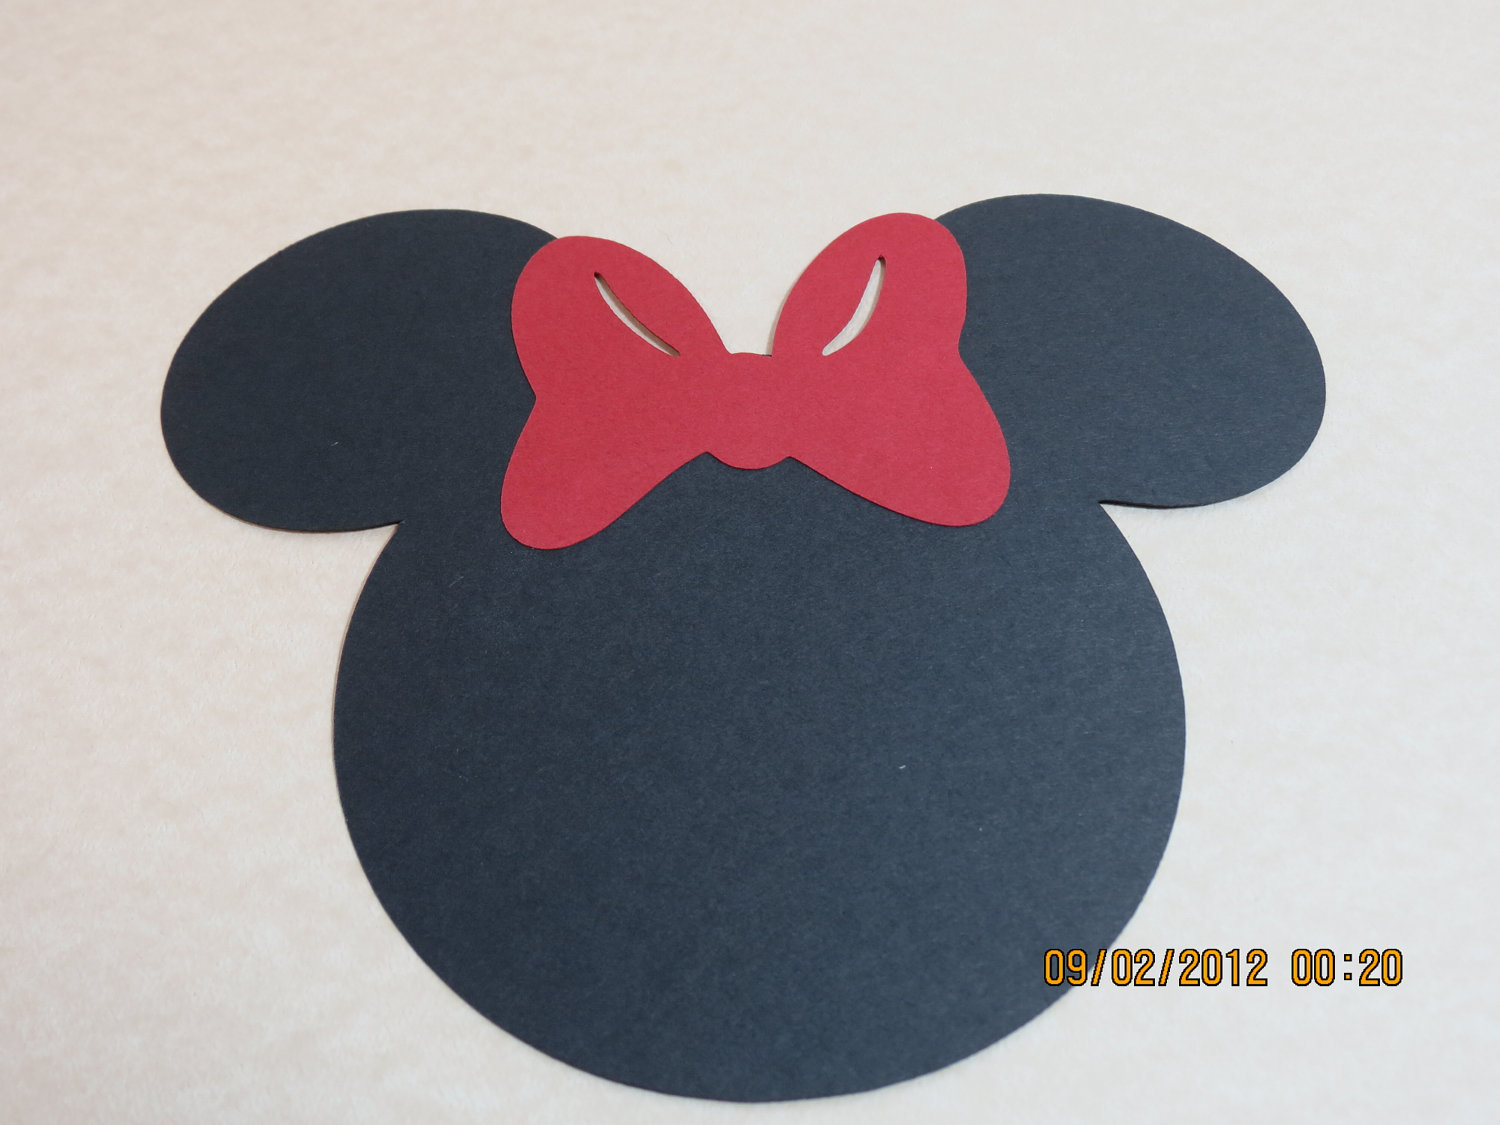 Popular items for minnie mouse diecuts on Etsy